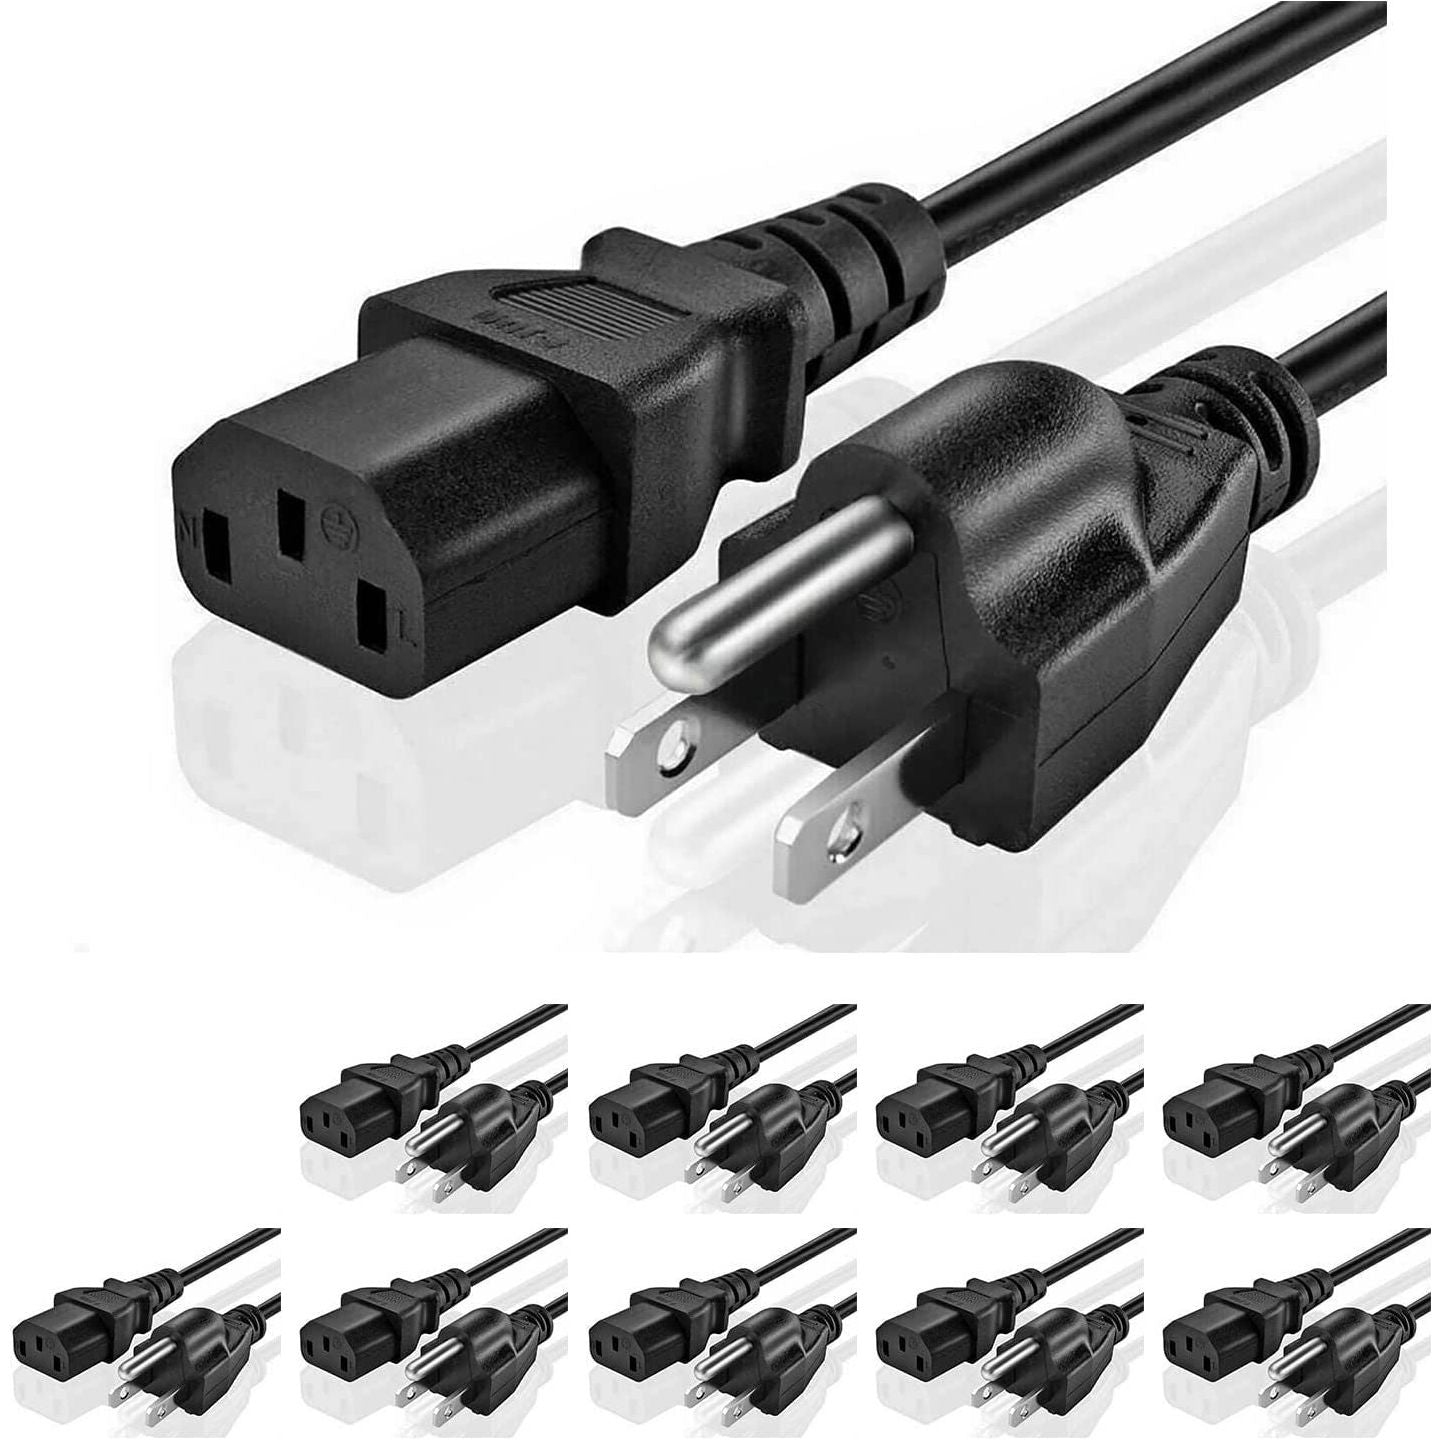 5Core Extra Long AC Wall Power Cord for Led TV Vizio Samsung 12 Feet 3 Prong PC 1002